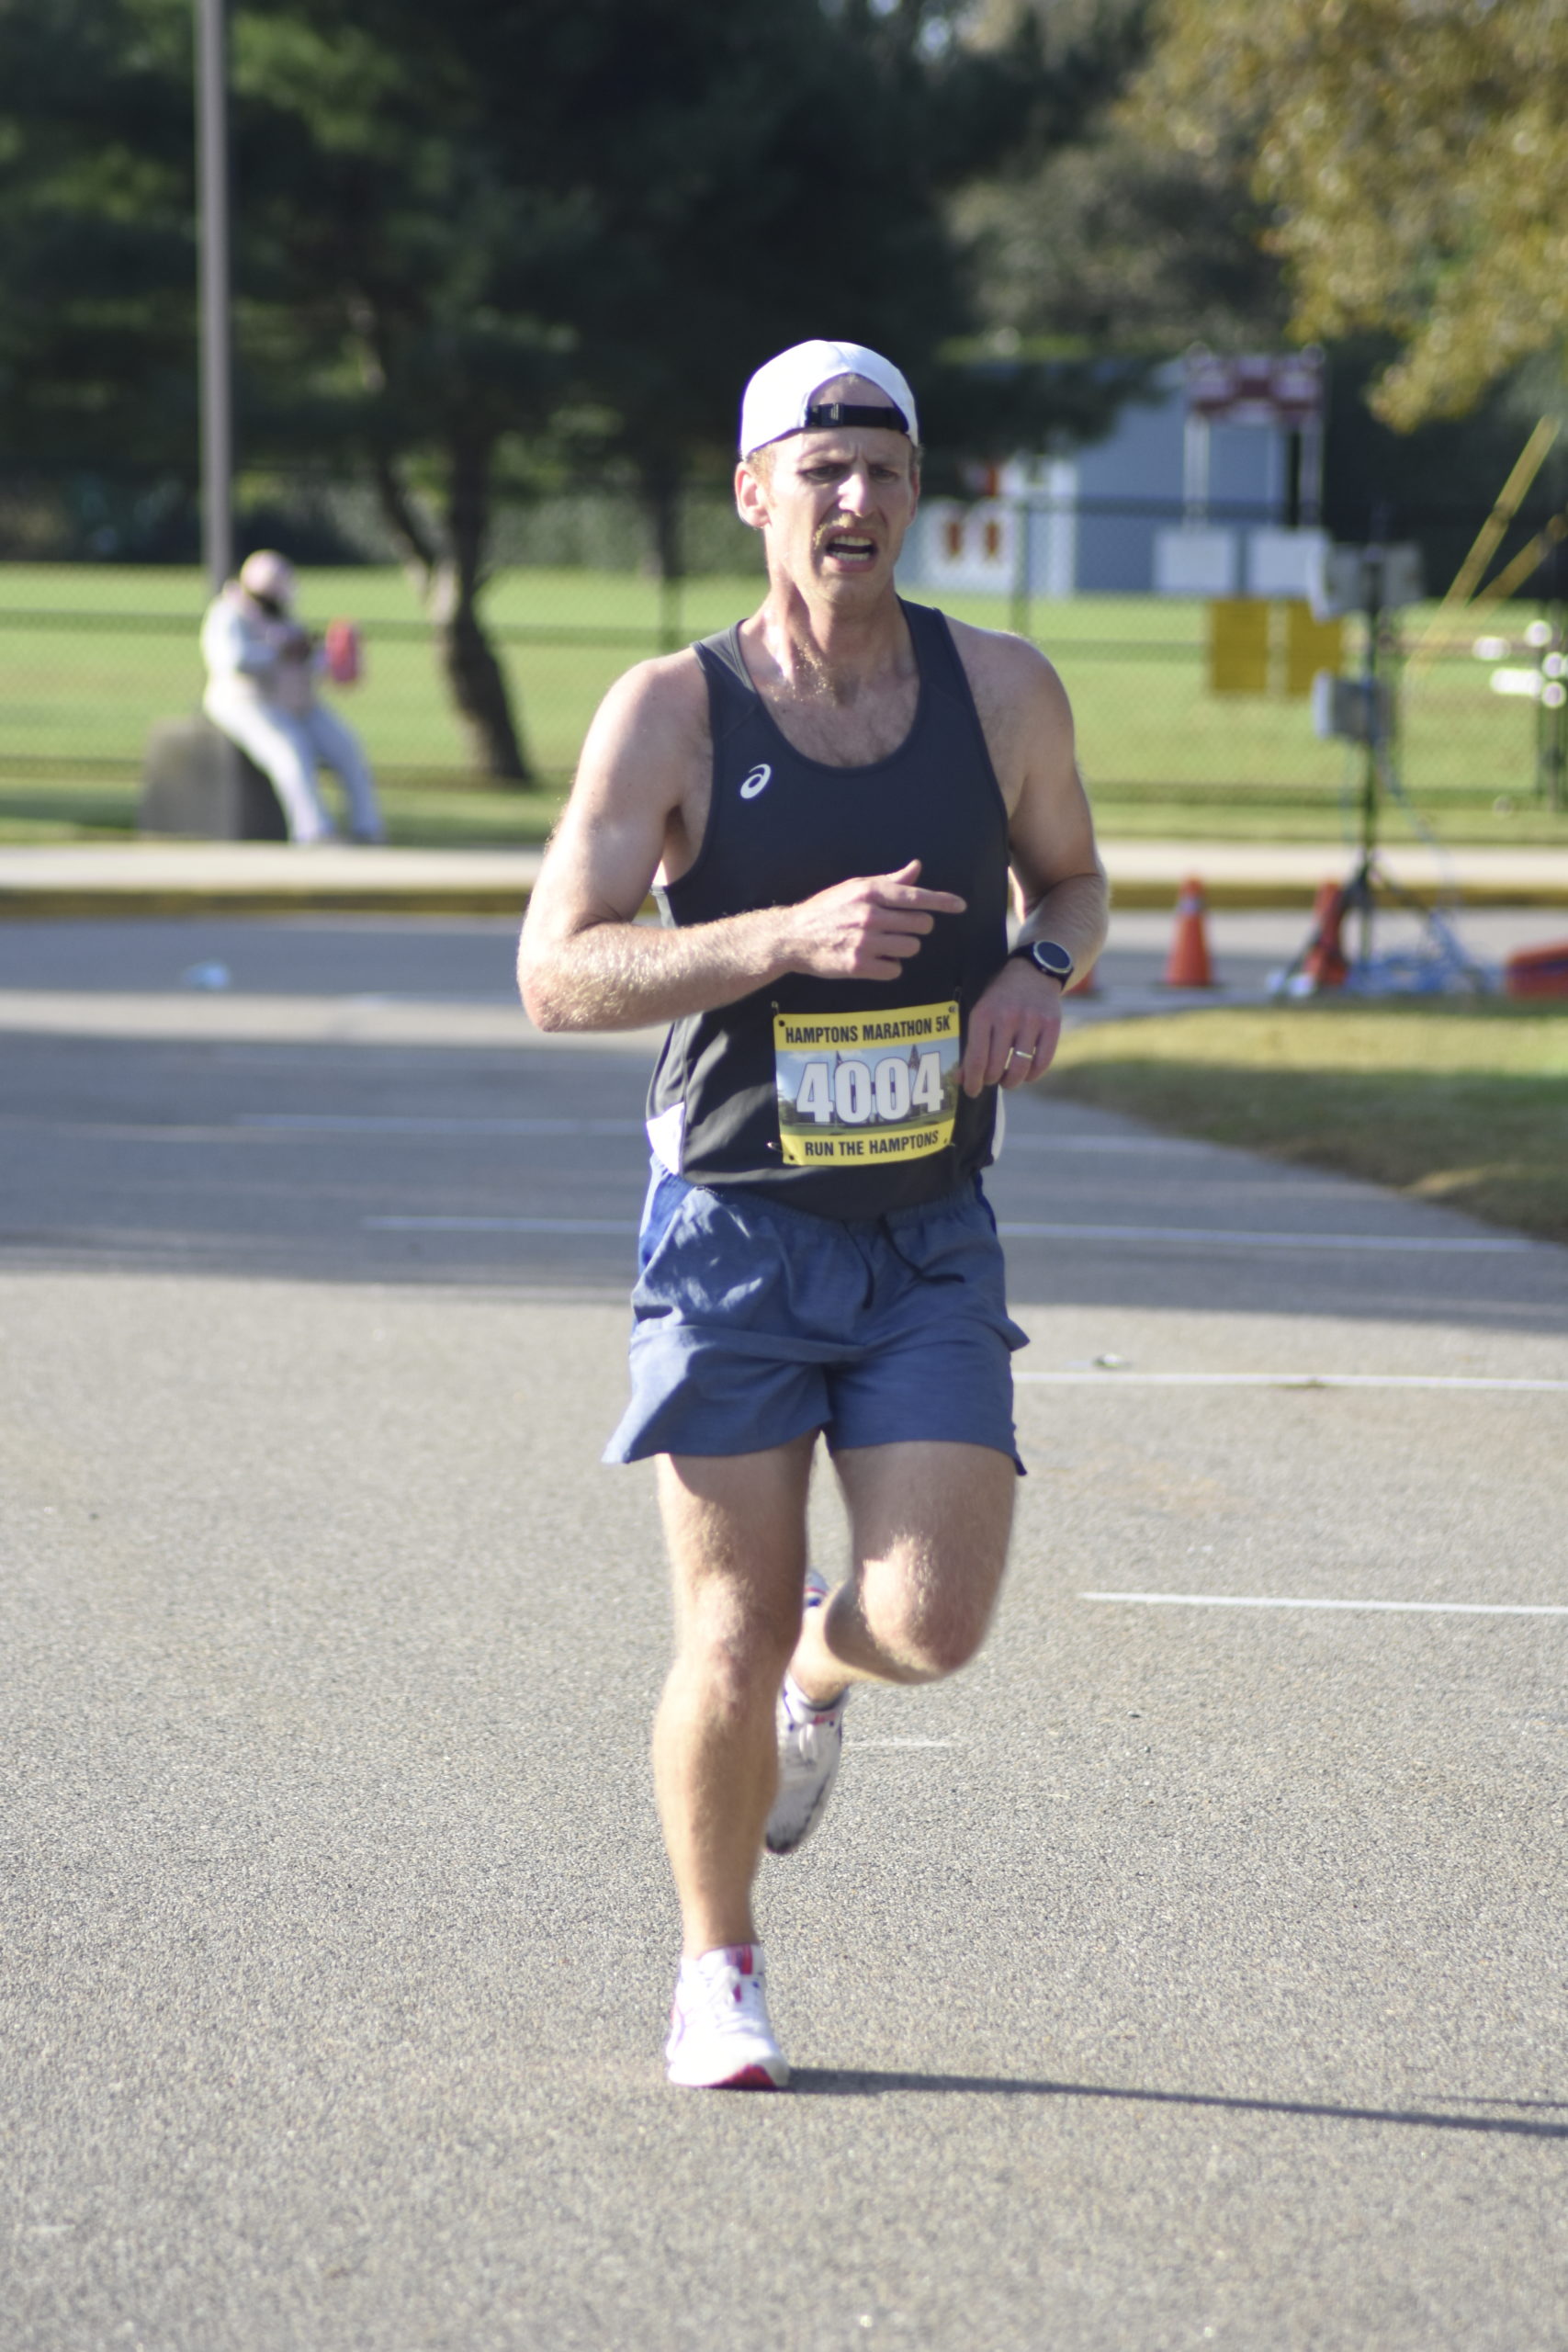 Kyle Anderson of Cambridge, Massachusetts, placed third overall in the 5K.